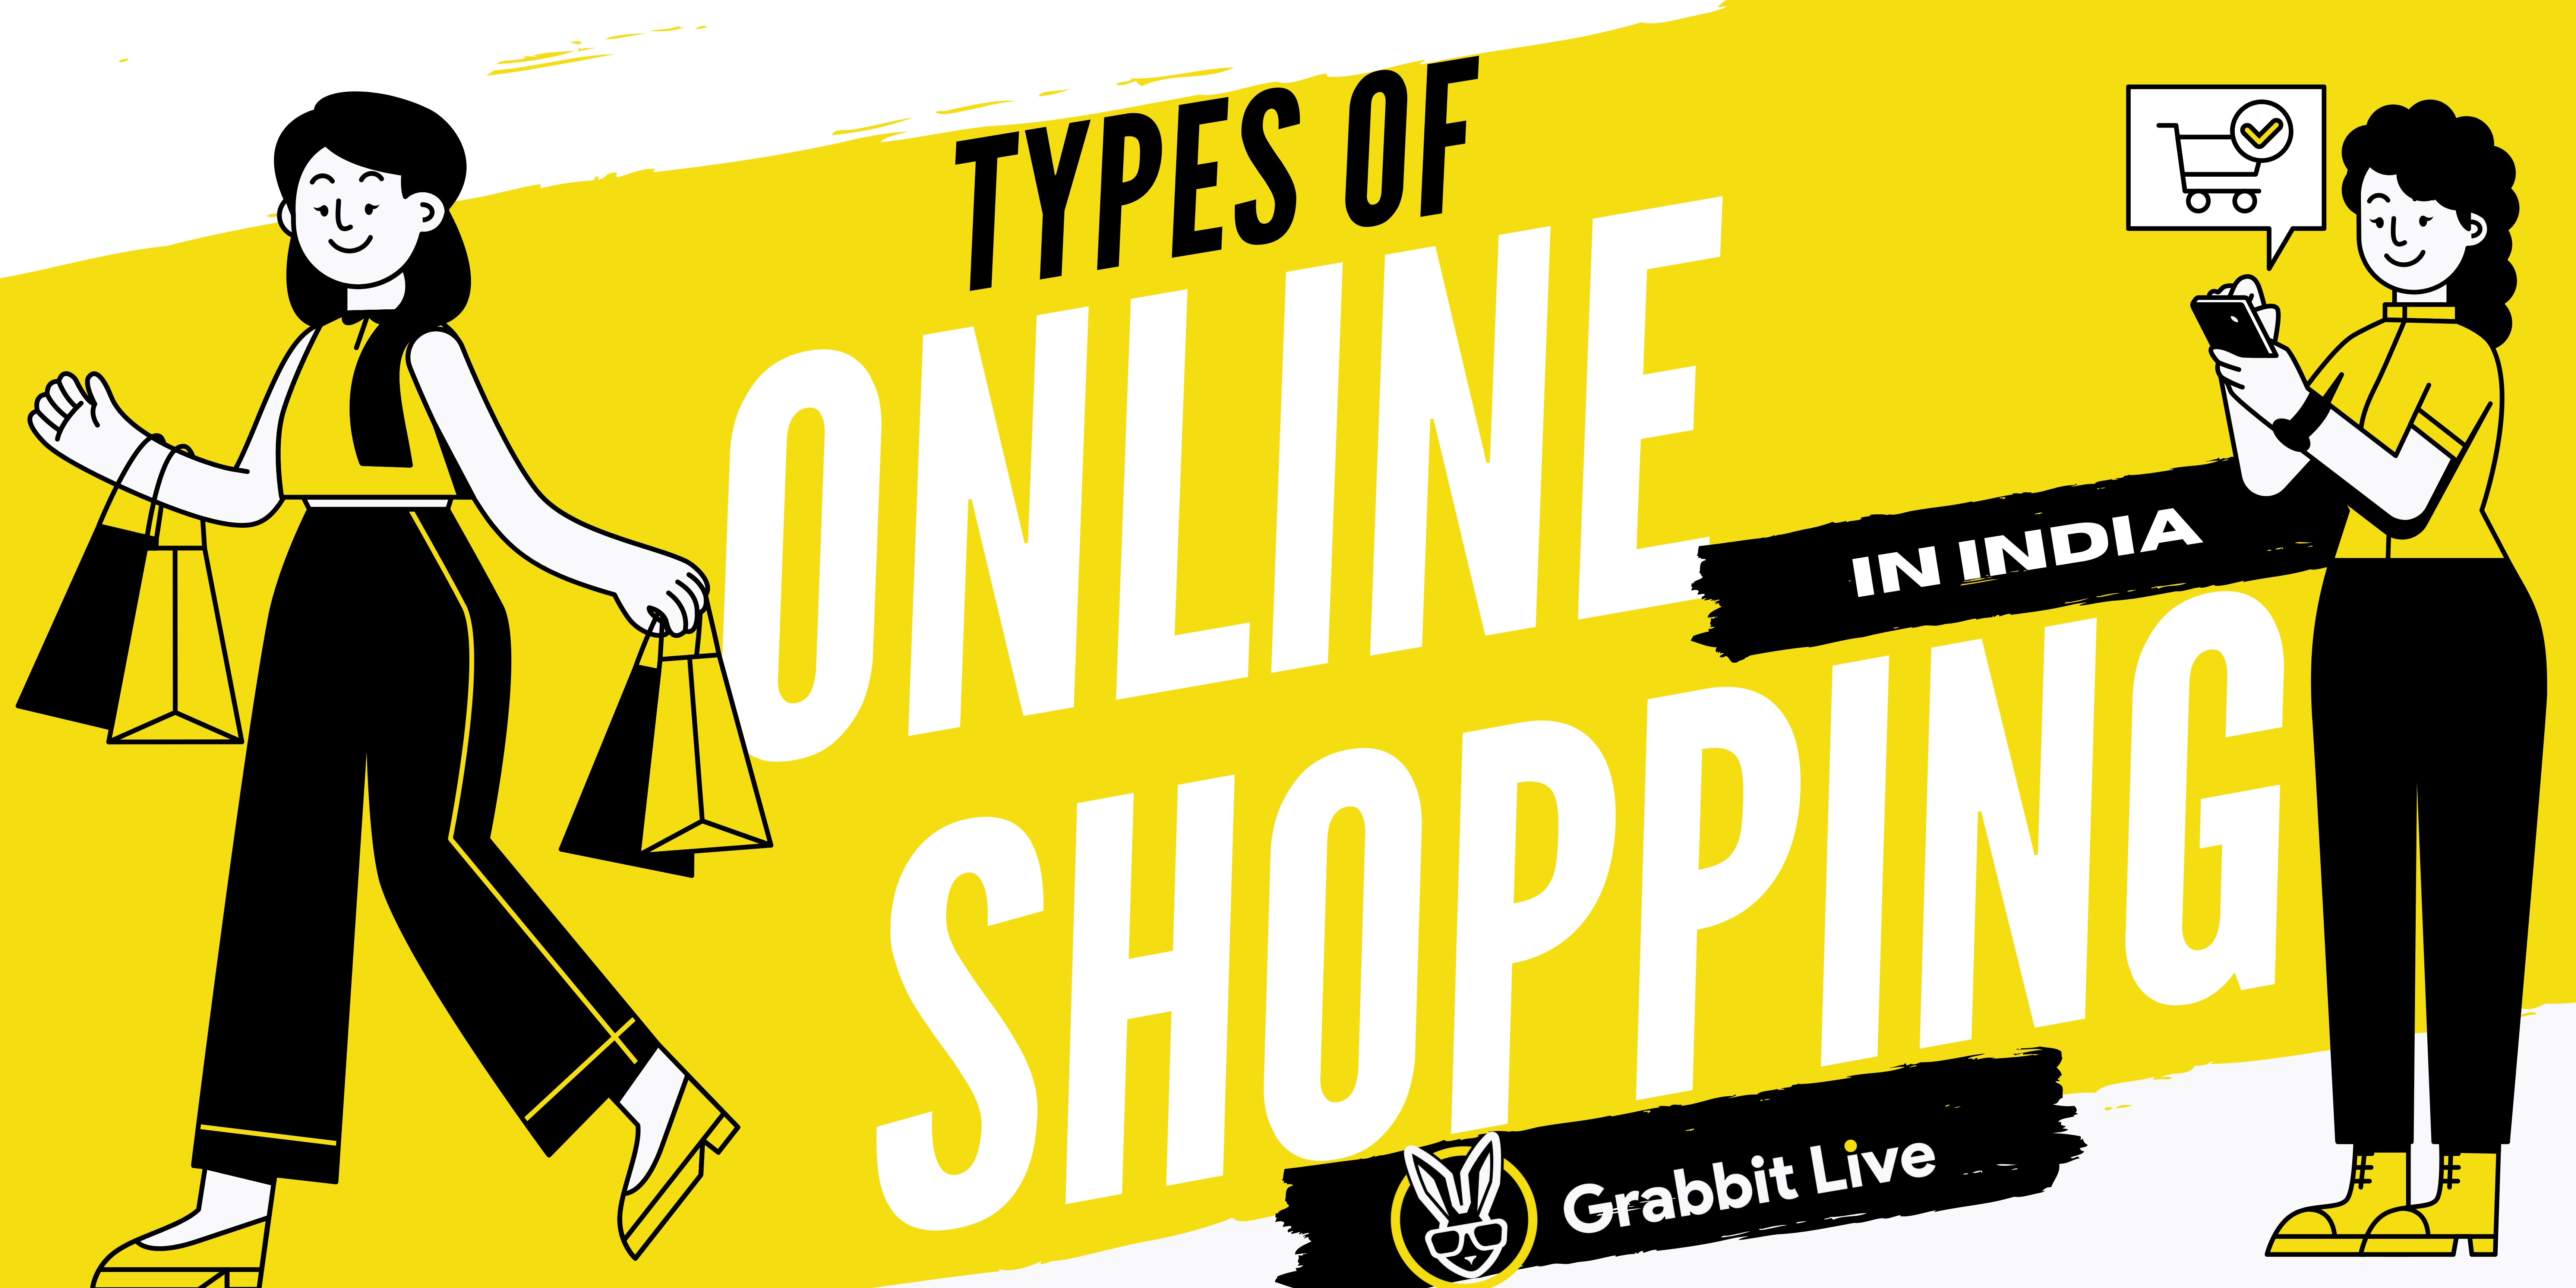 Different types of online shopping in India